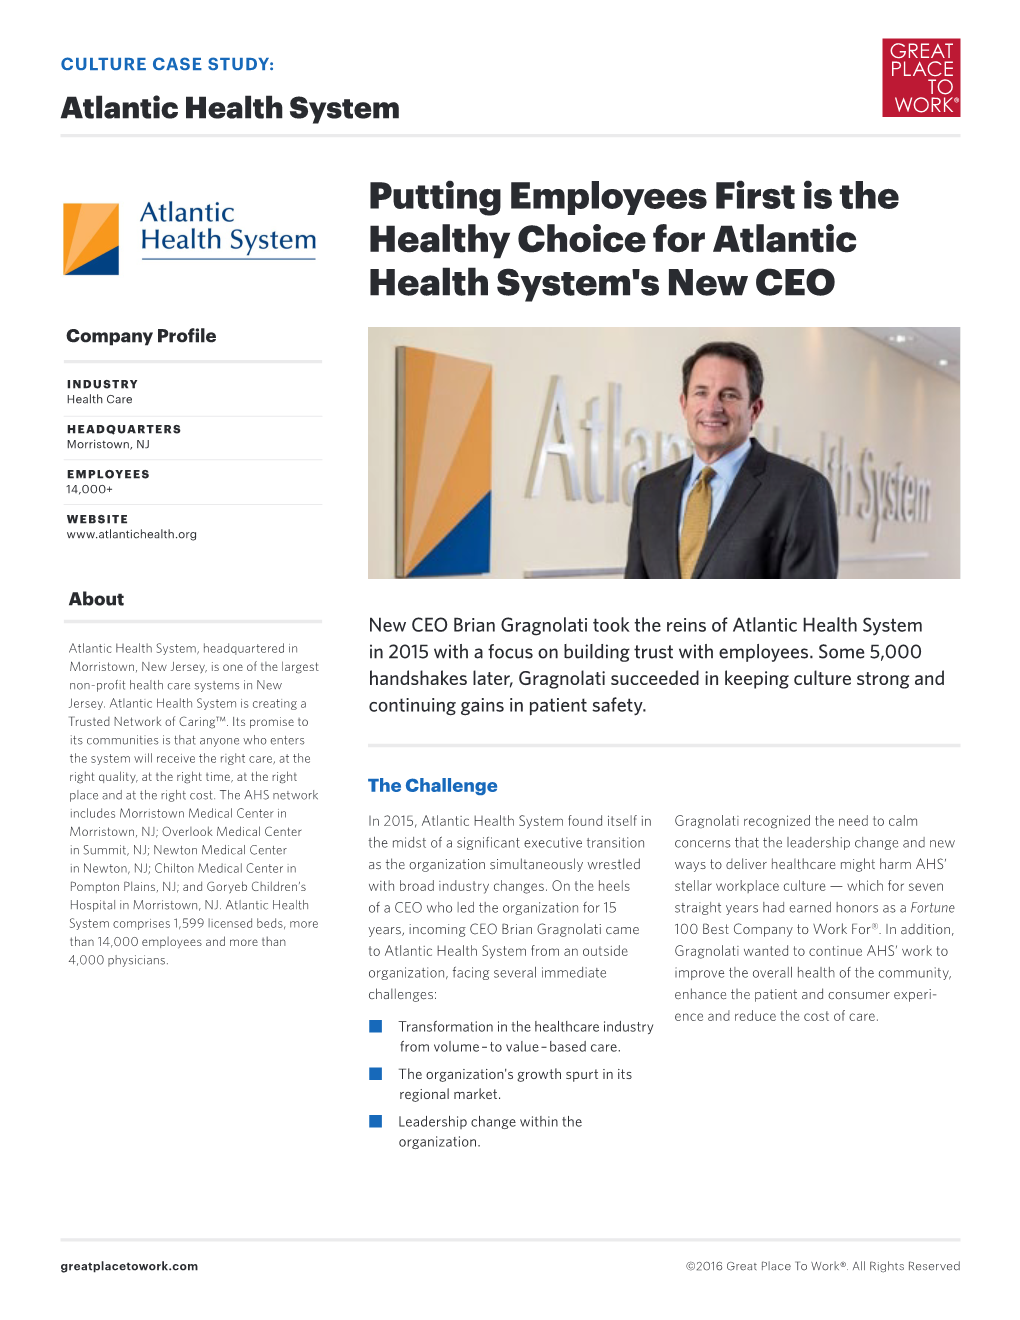 Putting Employees First Is the Healthy Choice for Atlantic Health System's New CEO